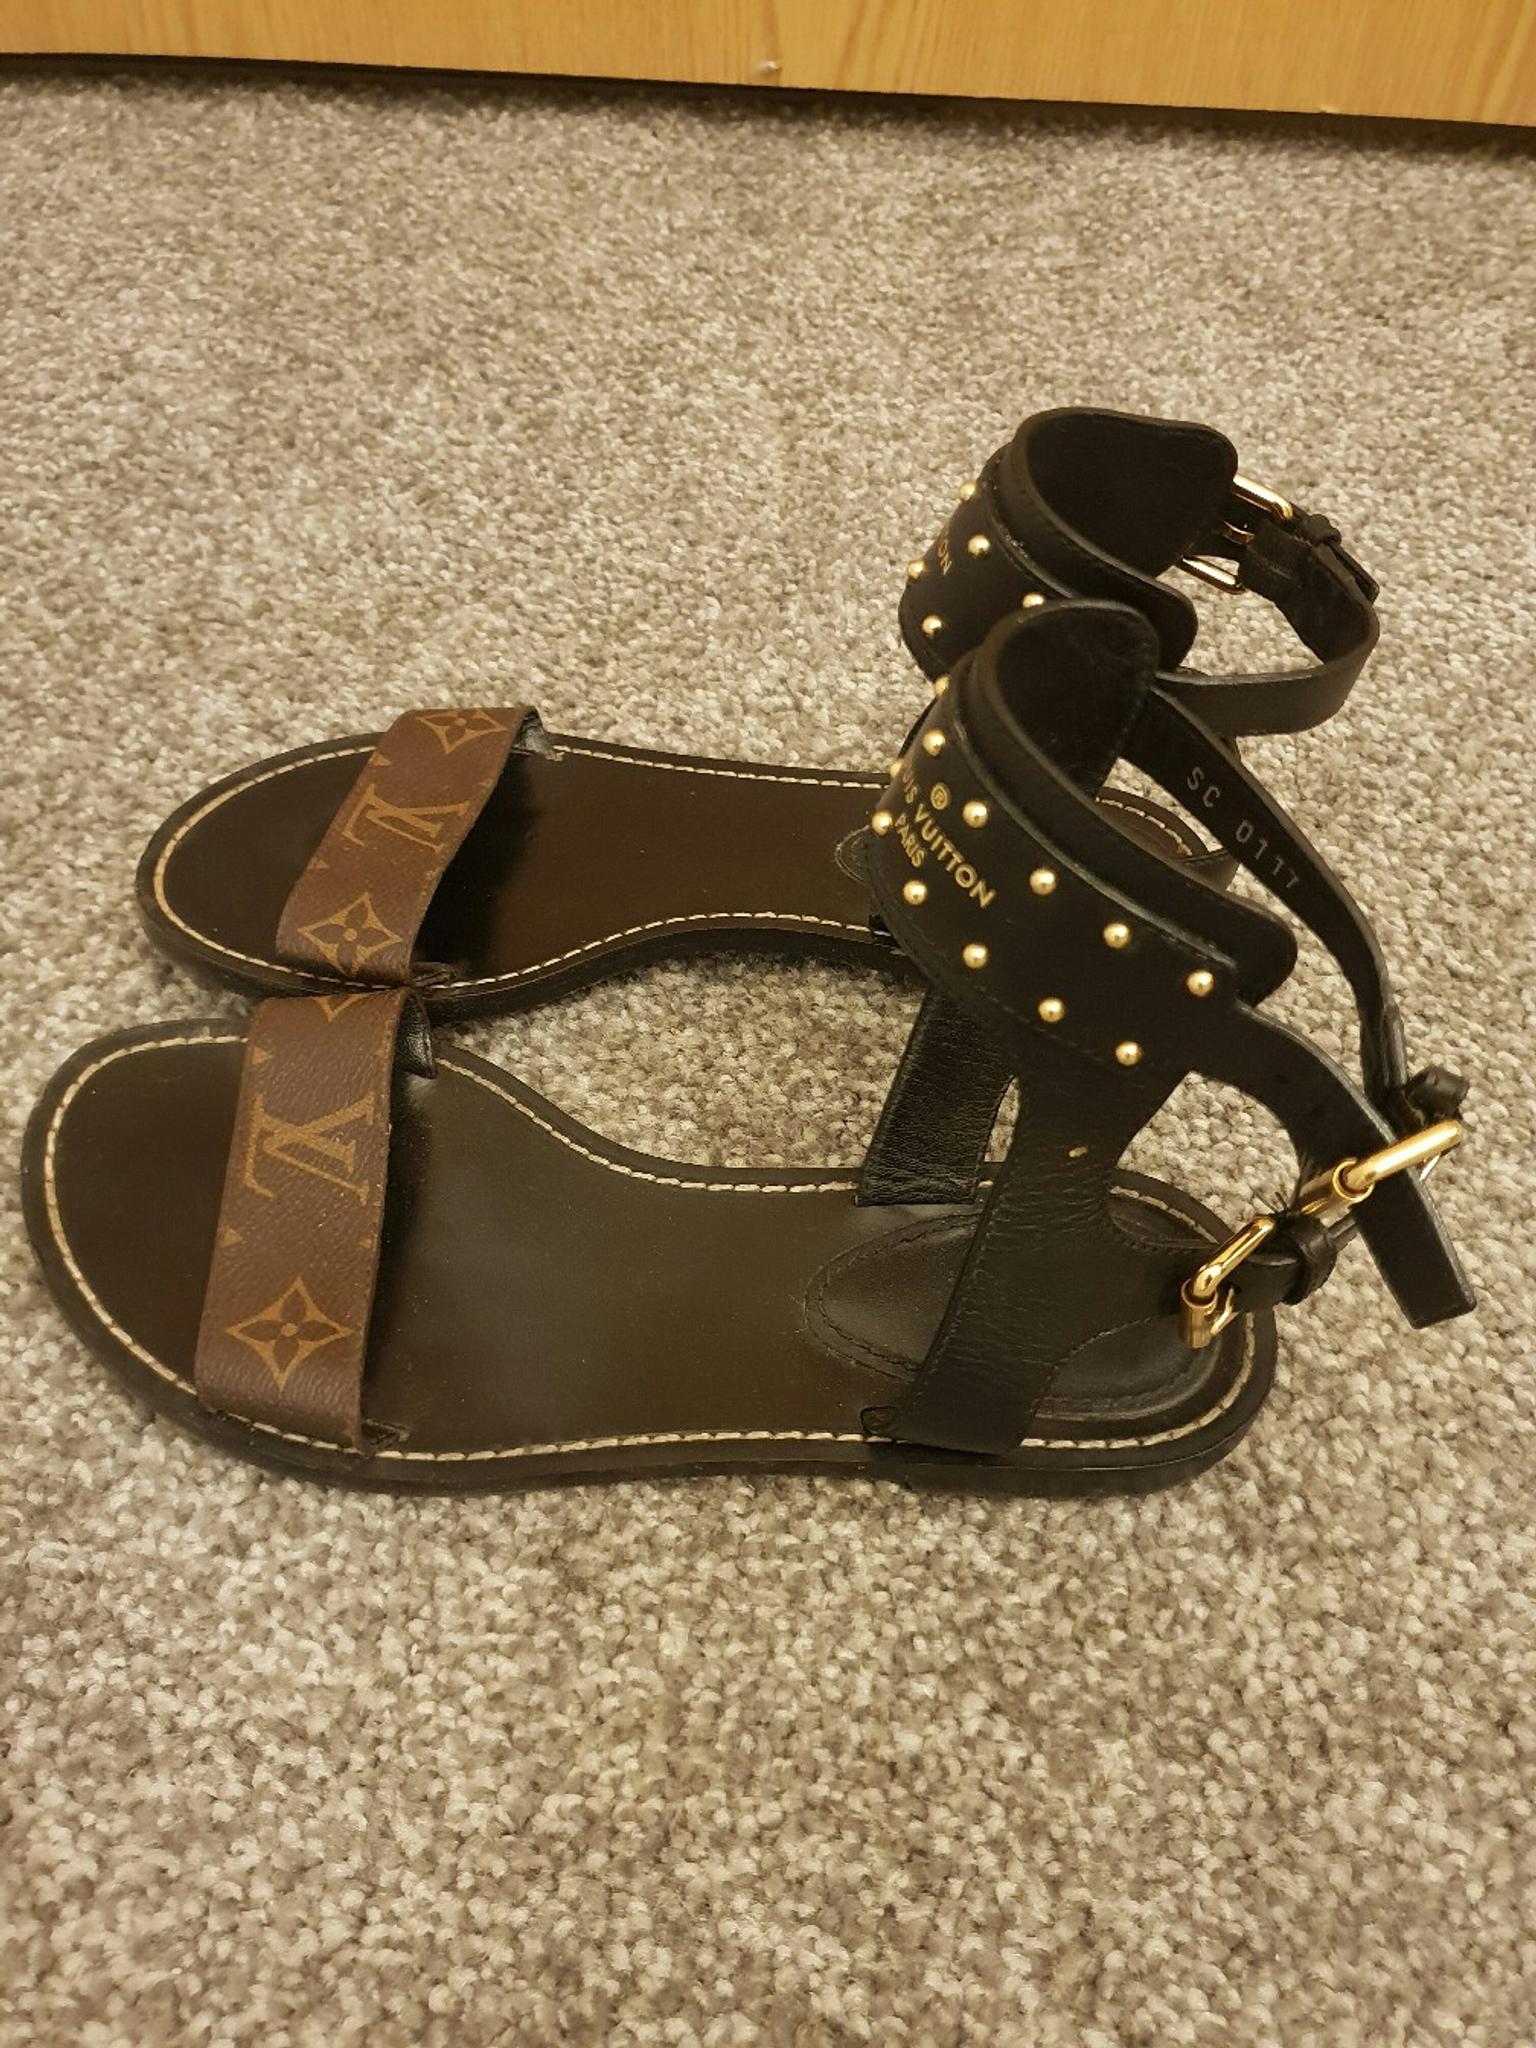 Louis vuitton sandals in RM1 London for £400.00 for sale | Shpock